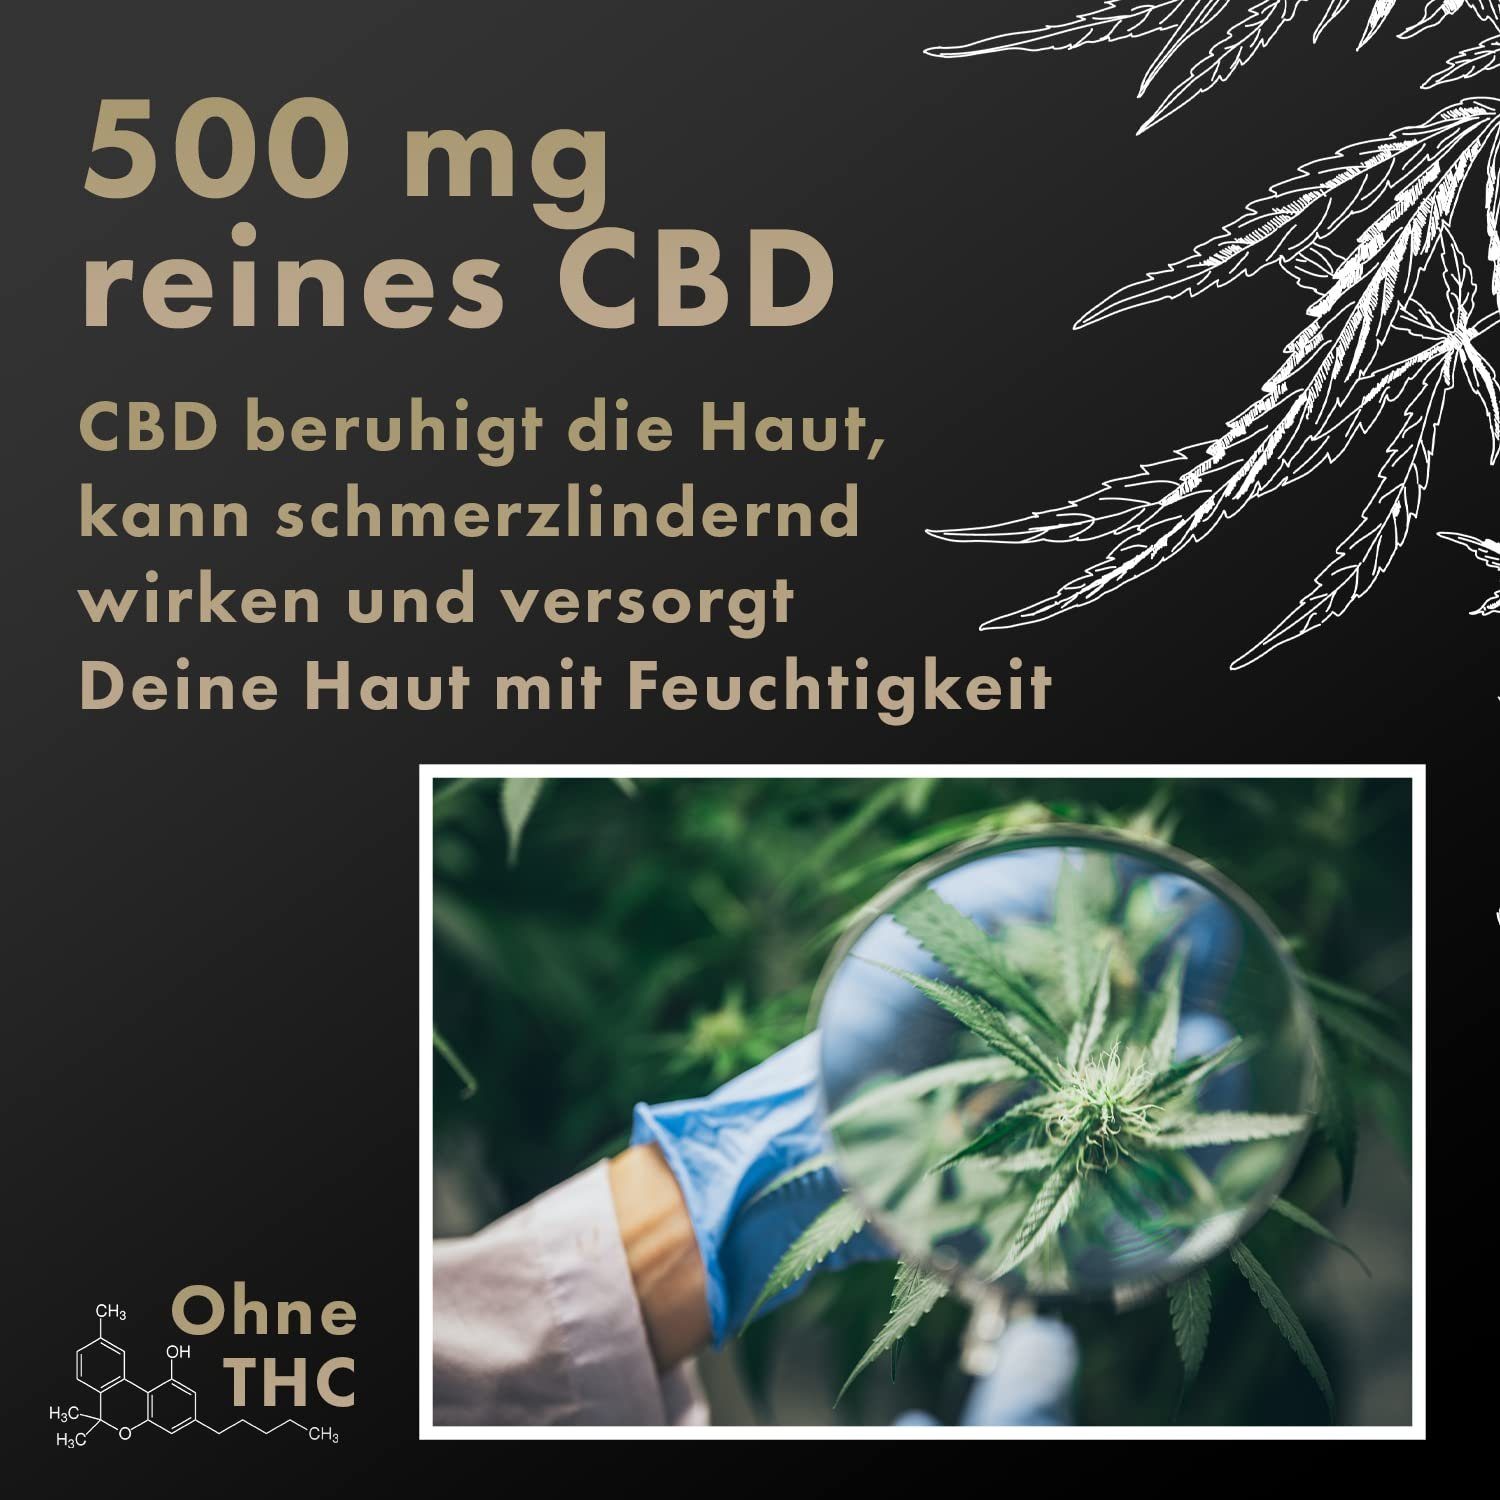 500 Dr. ml Edition" Berger Cell, "Black mit Tagescreme Tagescreme Moos 50 mg CBD mit